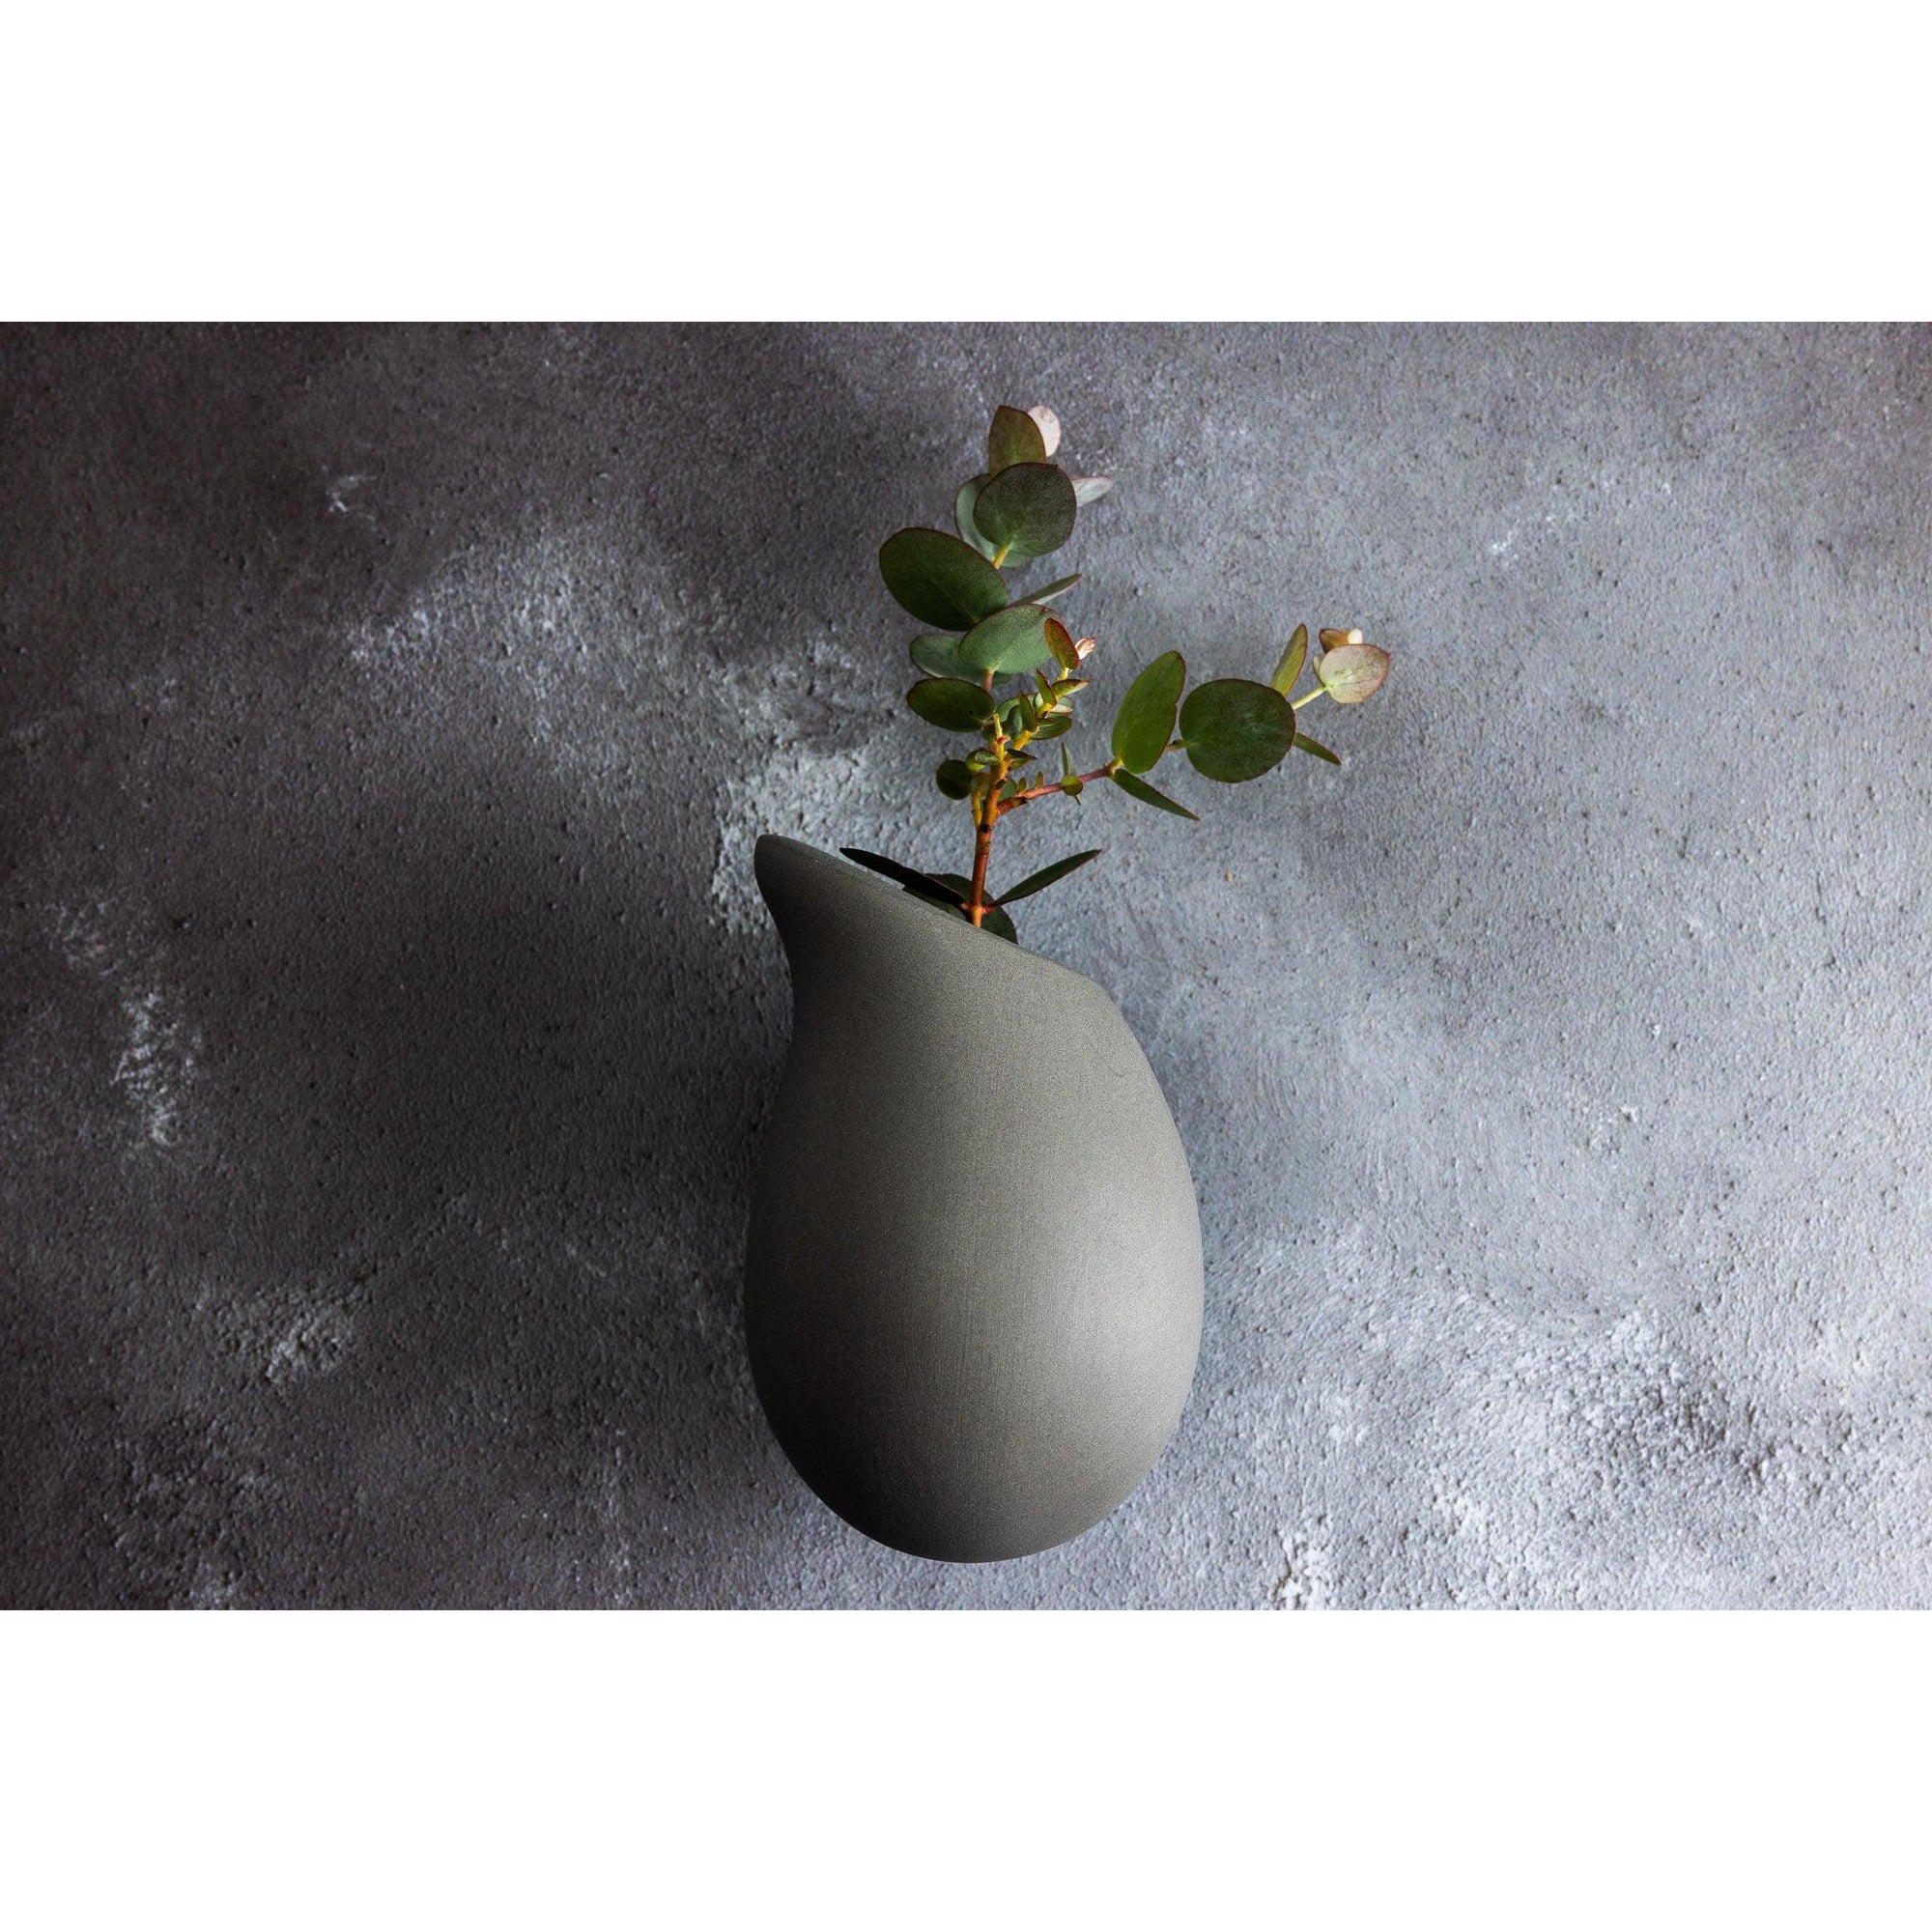 KSQ1 Droplet Wall Vase by Kate Schuricht, available at Padstow Gallery, Cornwall